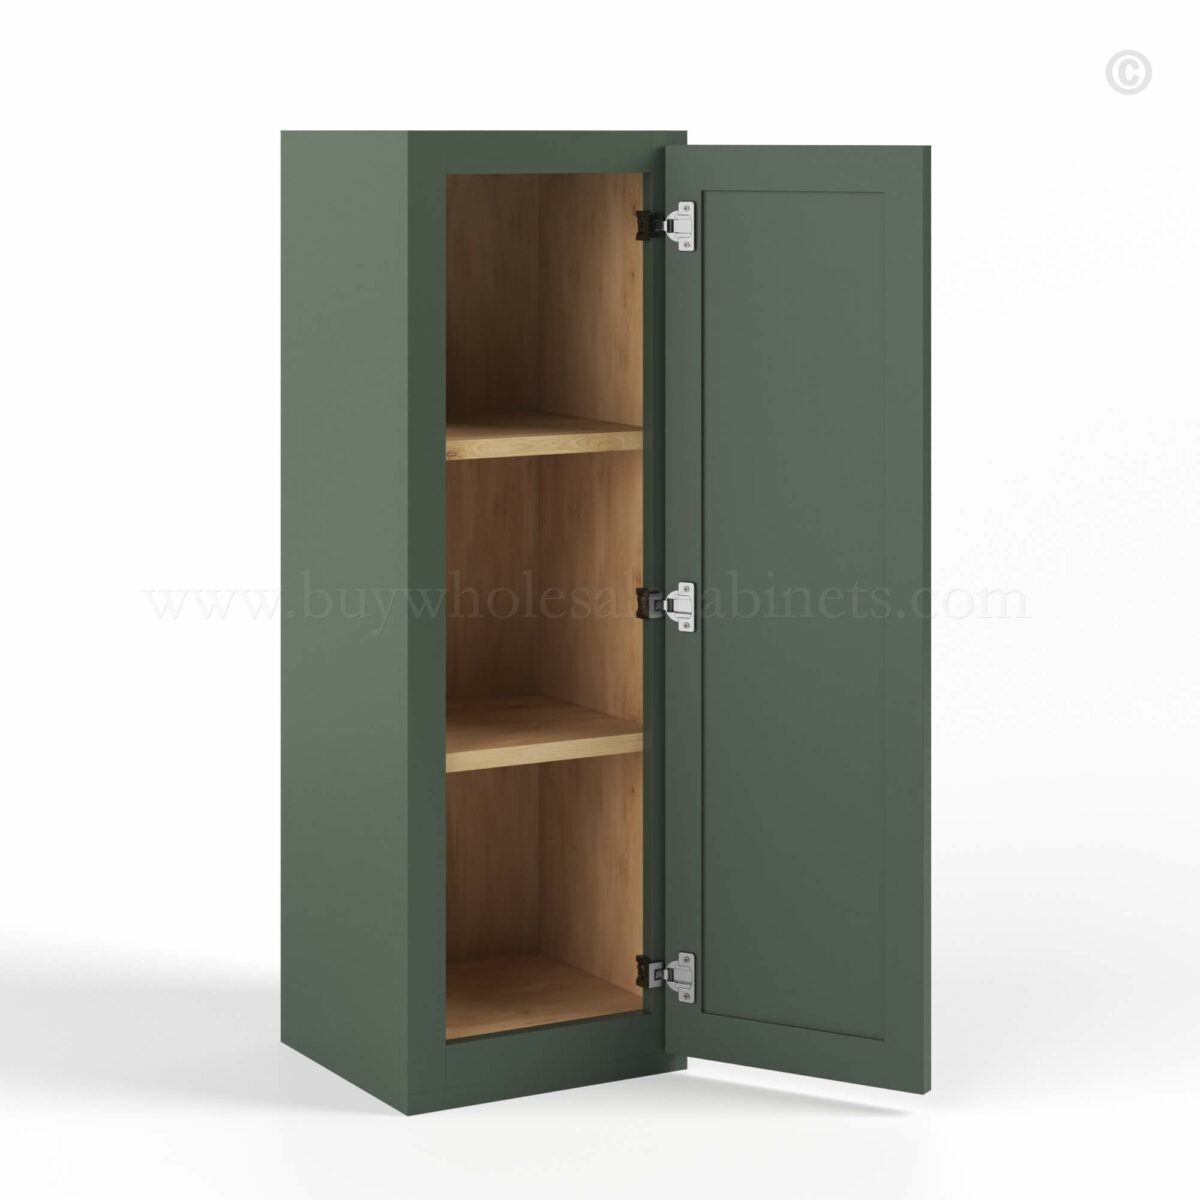 Slim Shaker Green Wall End Cabinet, rta cabinets, wholesale cabinets